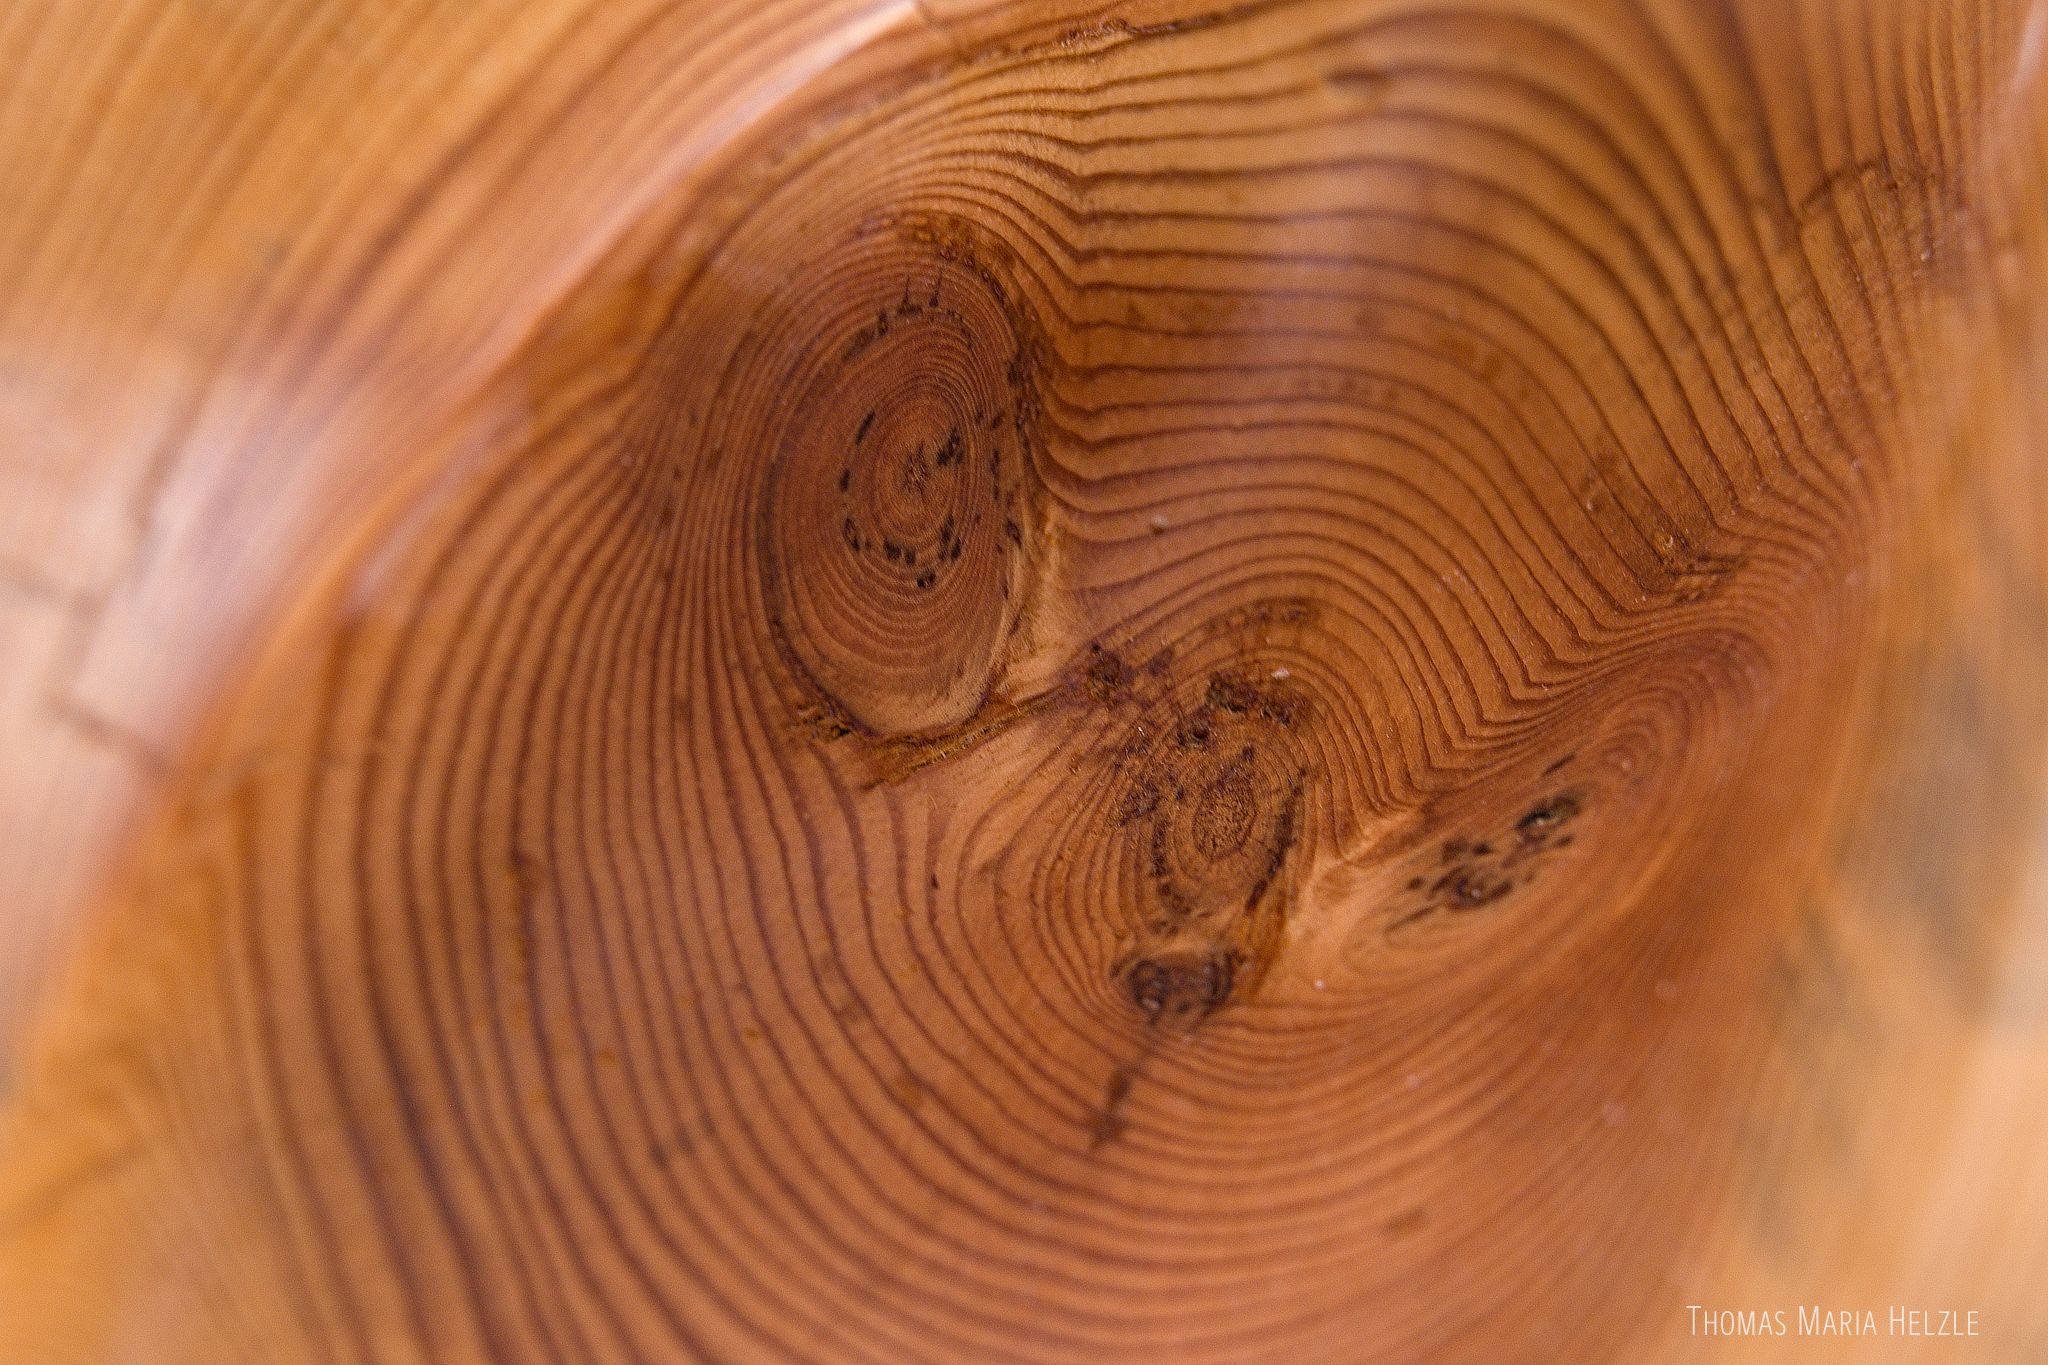 Macro of three wood knots inside the Transitions sculpture, showing strong wood grain and year-rings flowing with the organic shape of the carving.